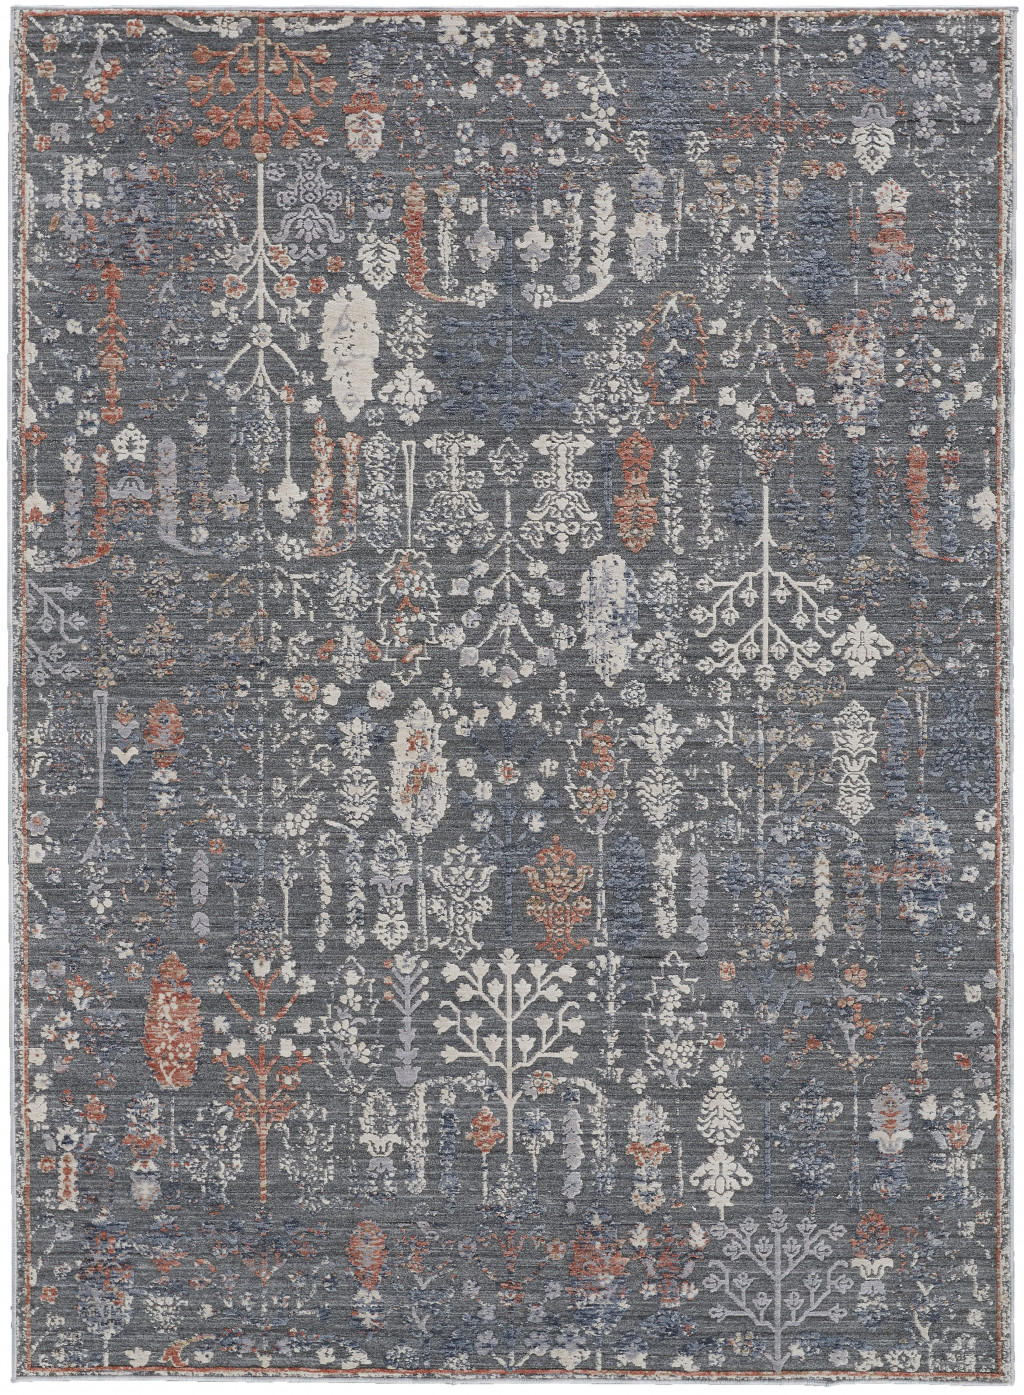 9' X 13' Gray Ivory And Orange Floral Power Loom Area Rug-514897-1